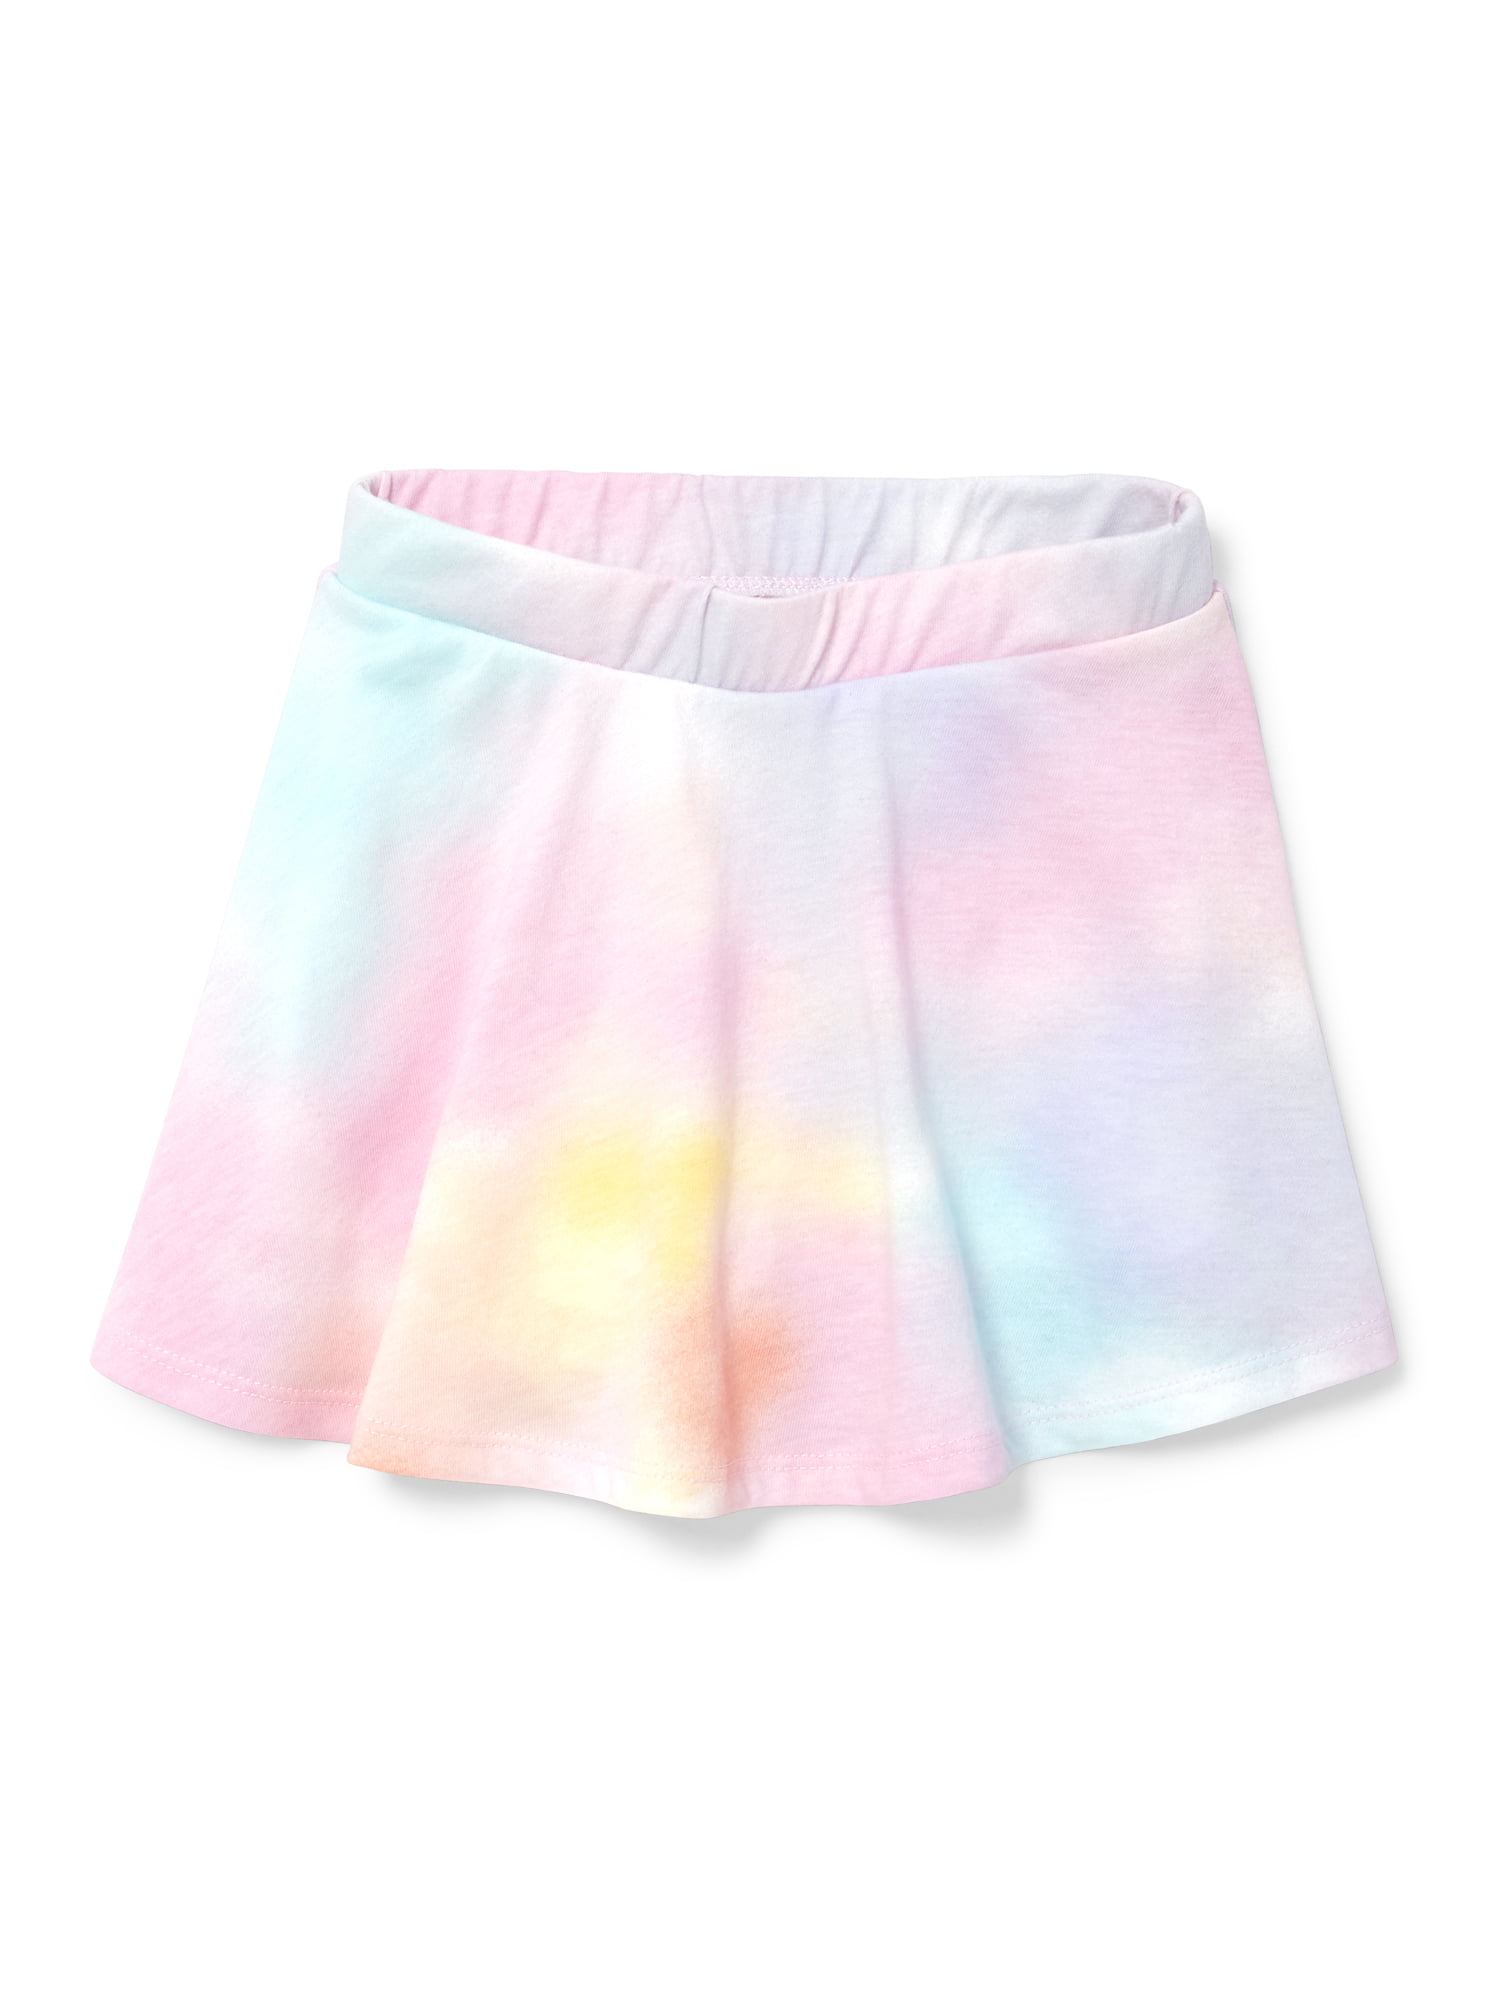 The Childrens Place Girls Printed Skorts 